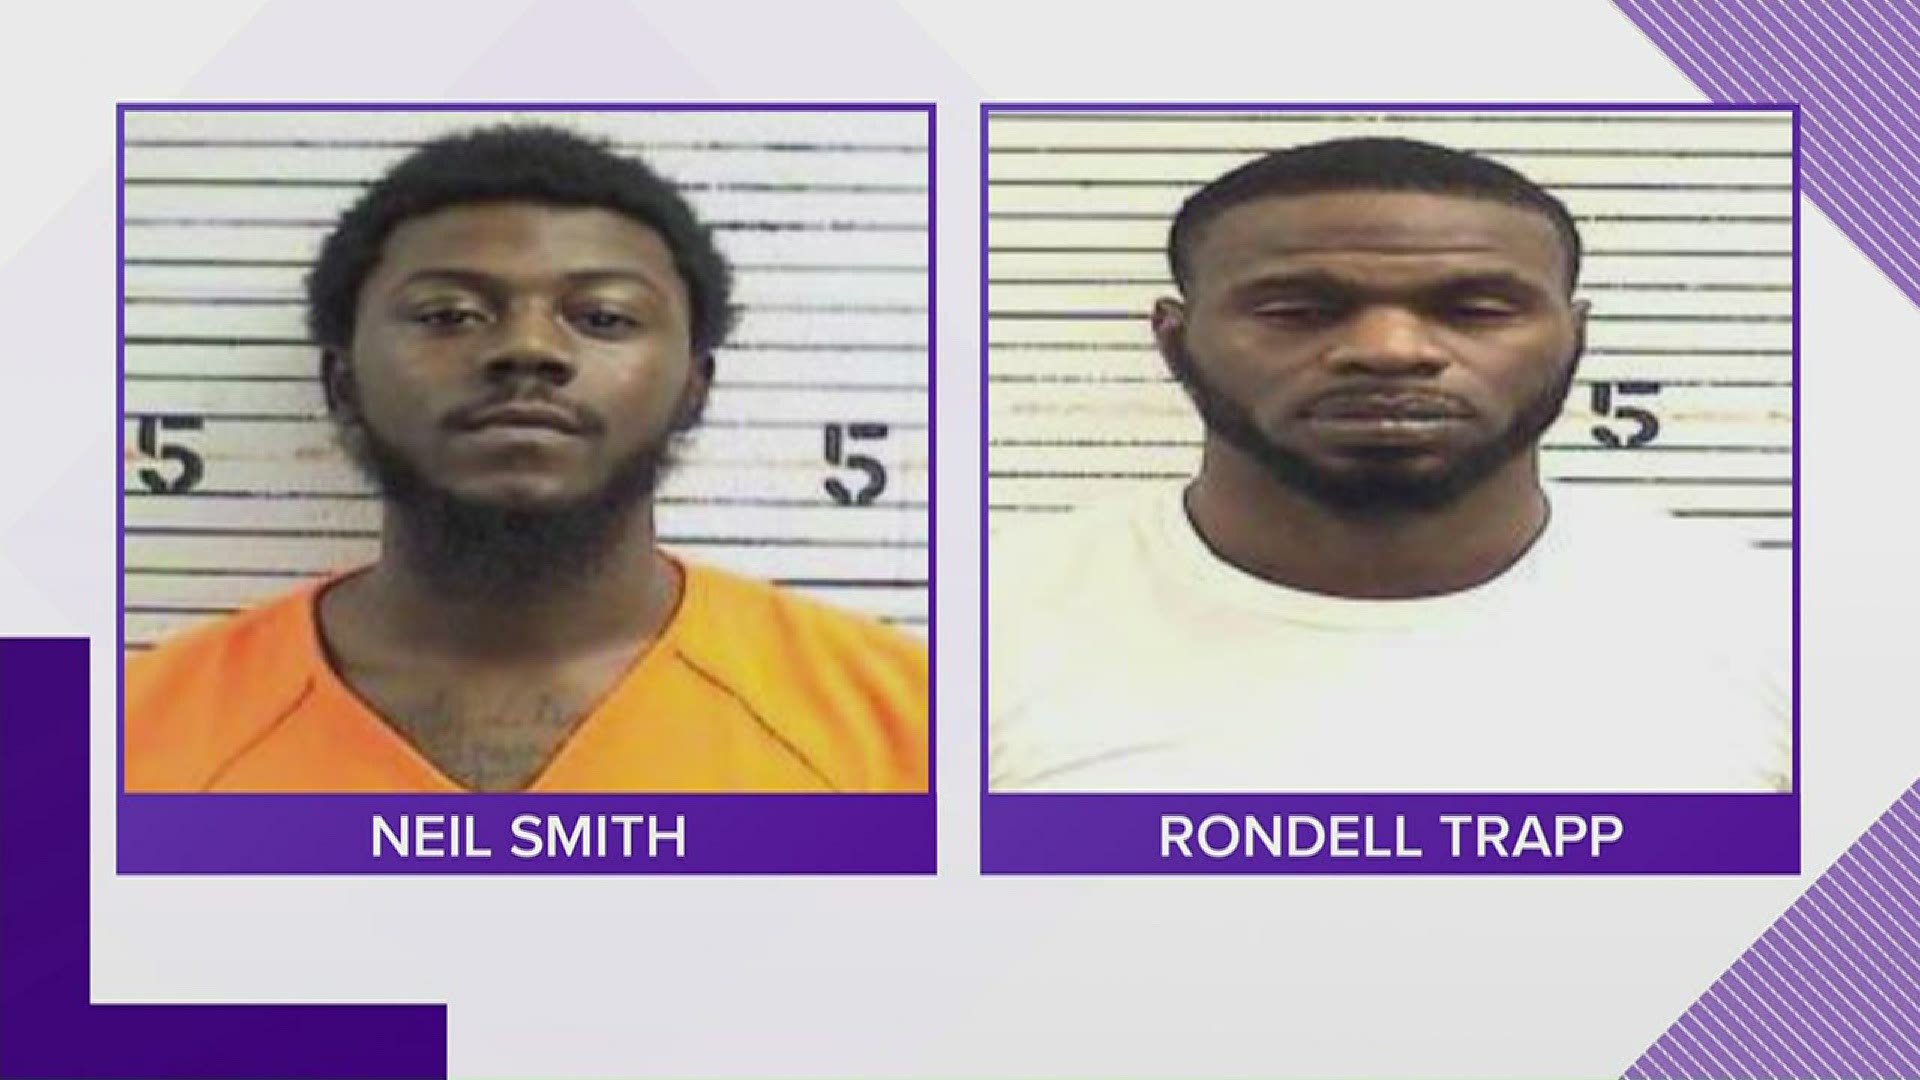 Deputies are looking for two men, Neil Smith and Rondall Trapp.